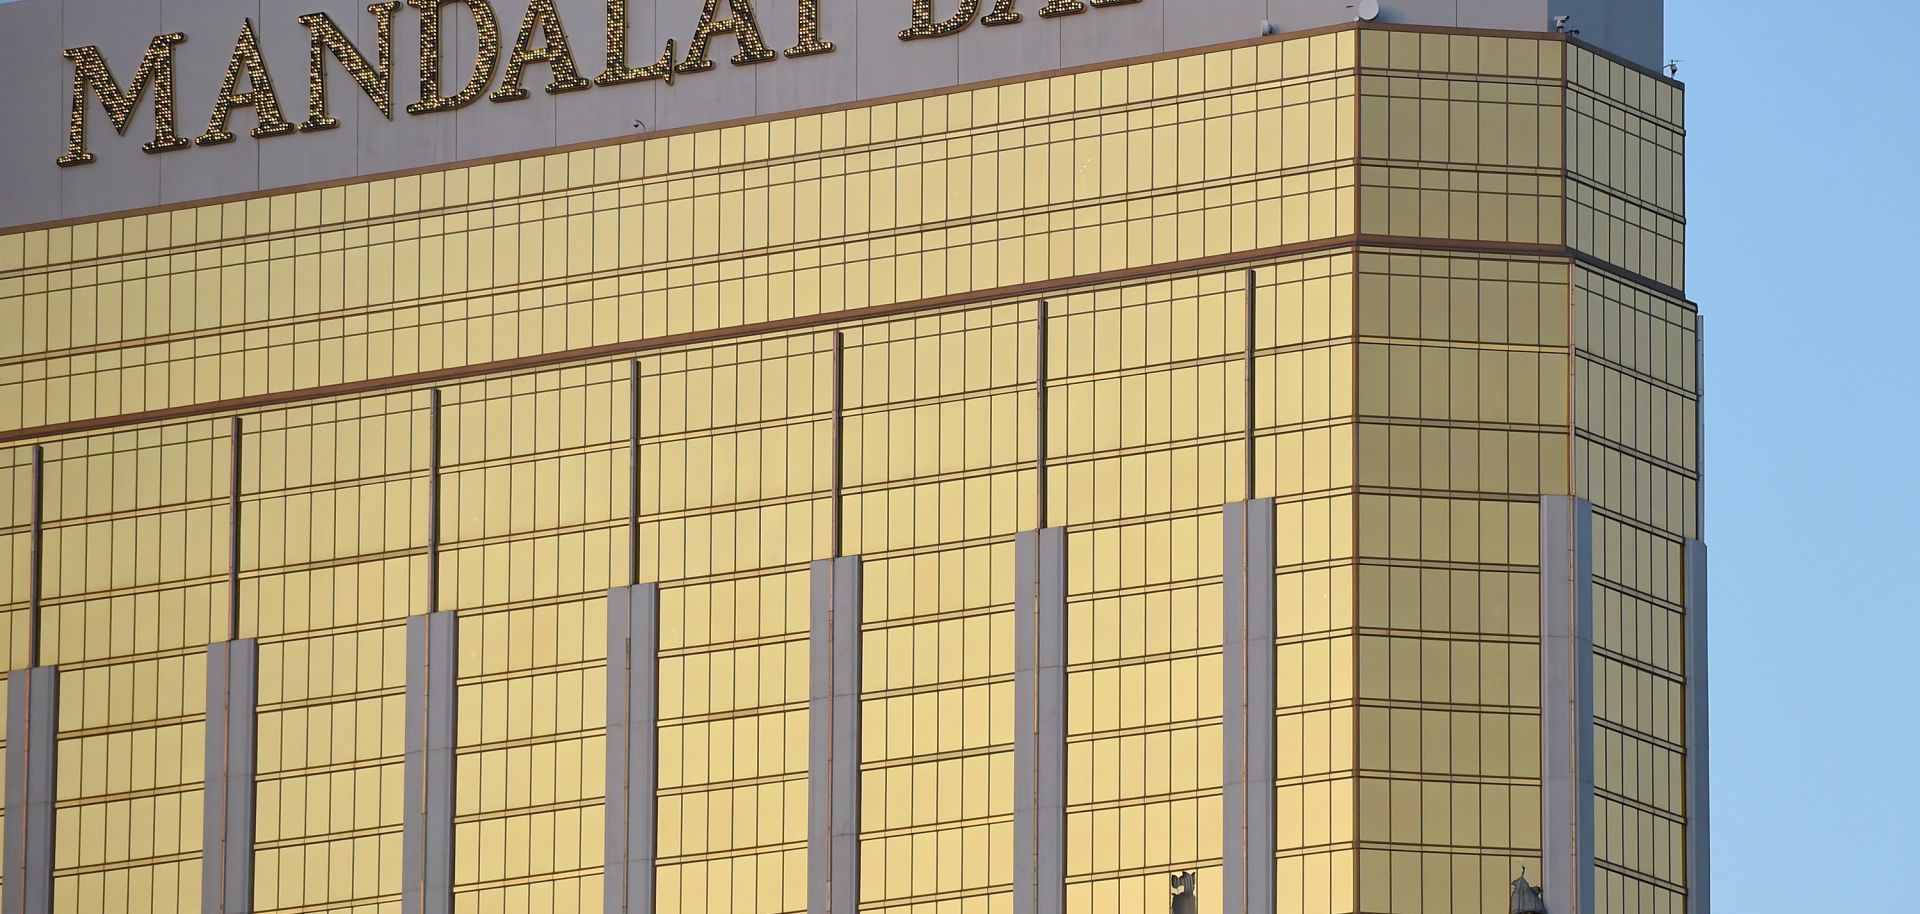 Evidence of the sniper's perch in the form of broken windows on the 32nd floor of the Mandalay Bay hotel and casino in Las Vegas.